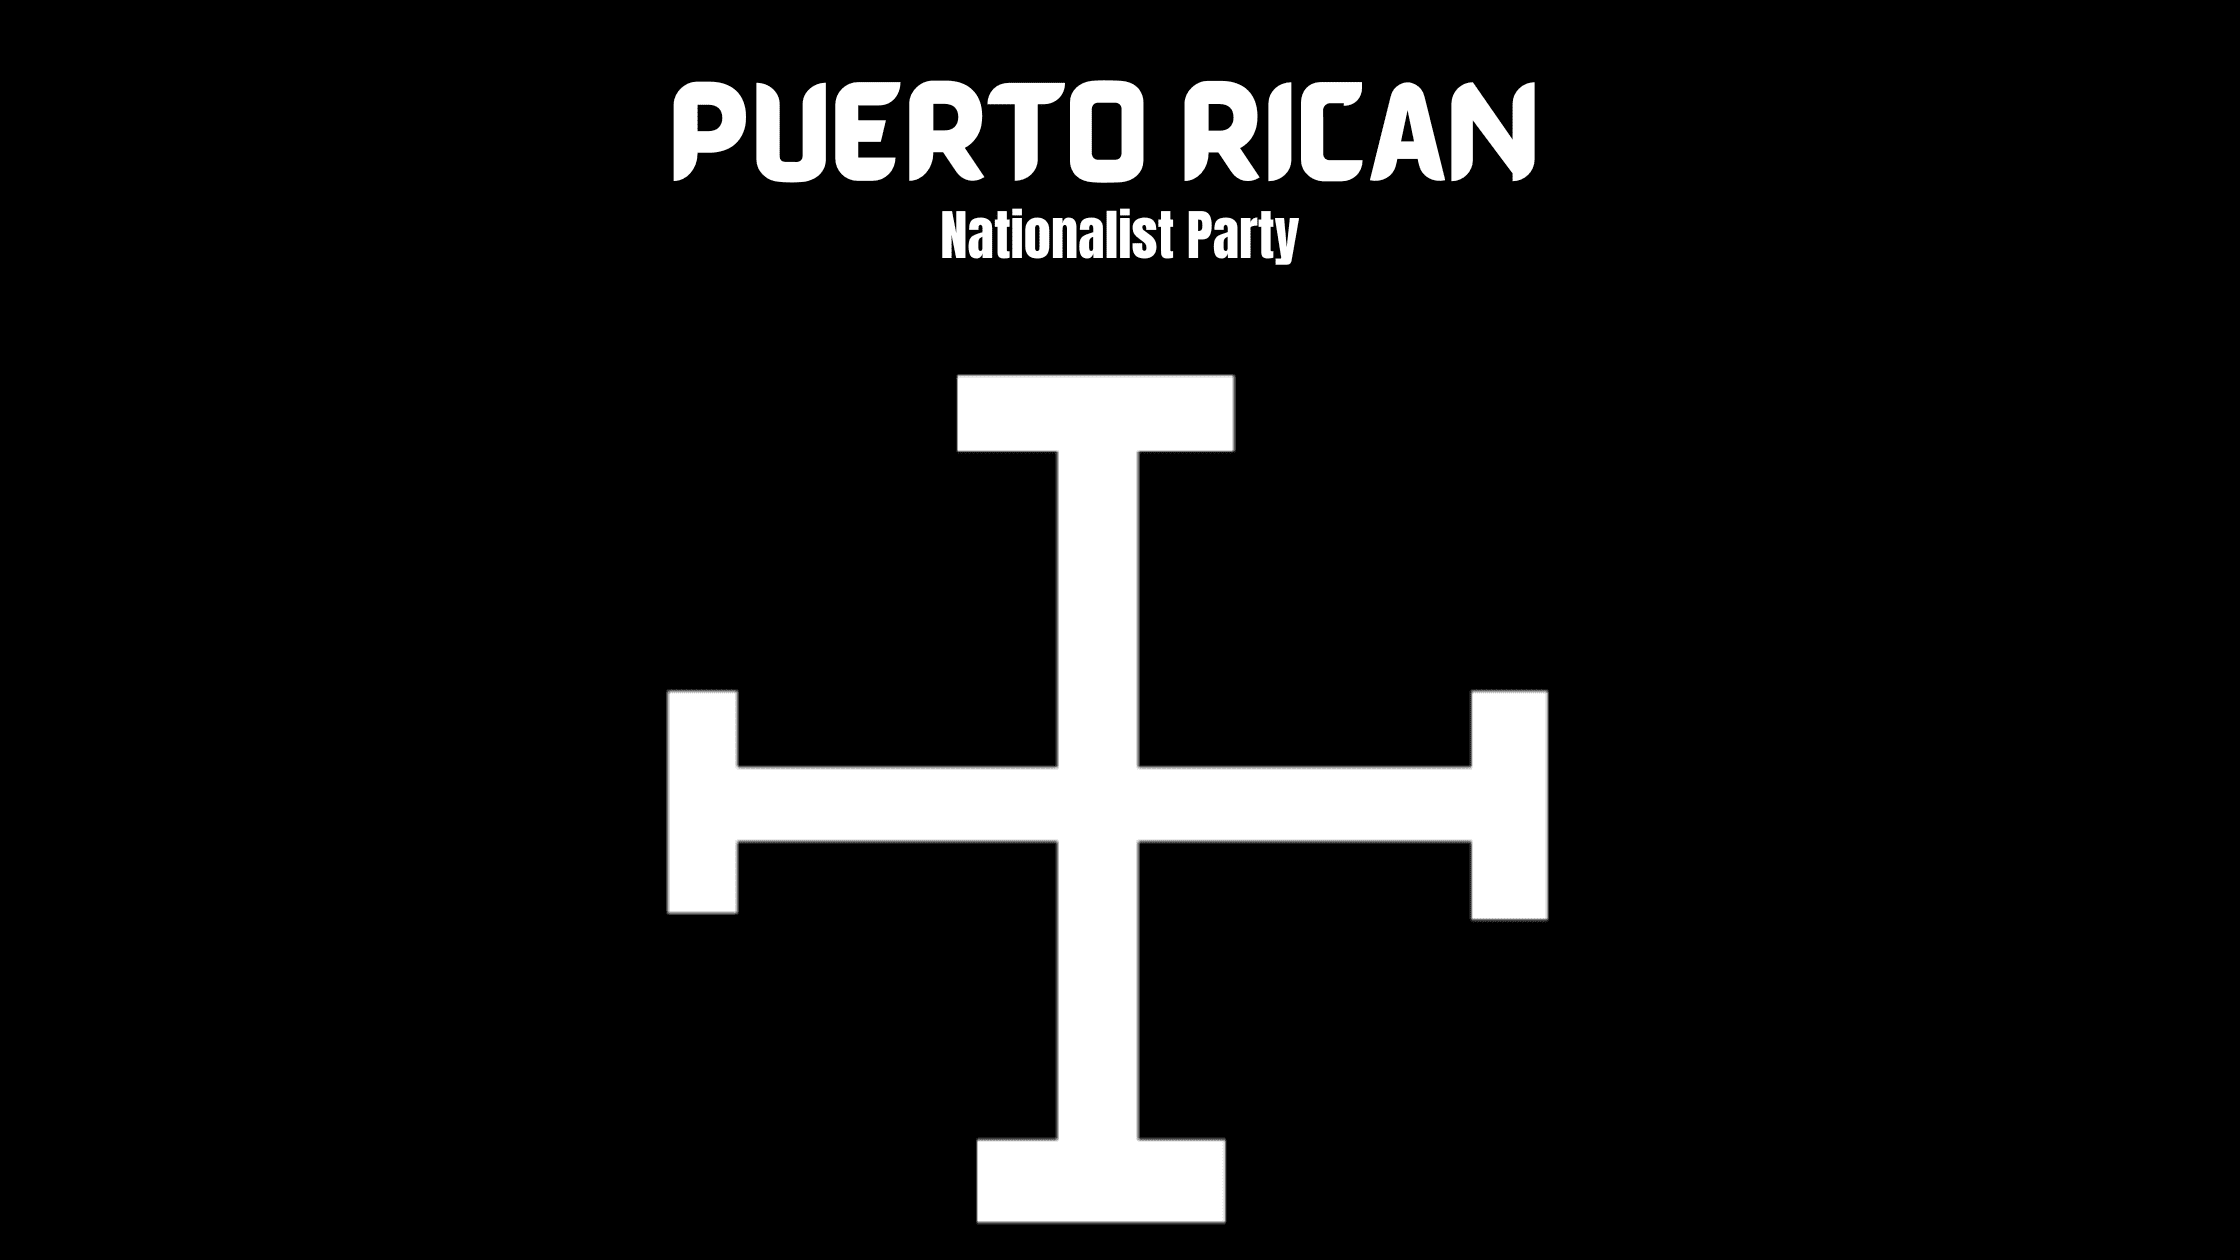 Puerto Rican Nationalist Party